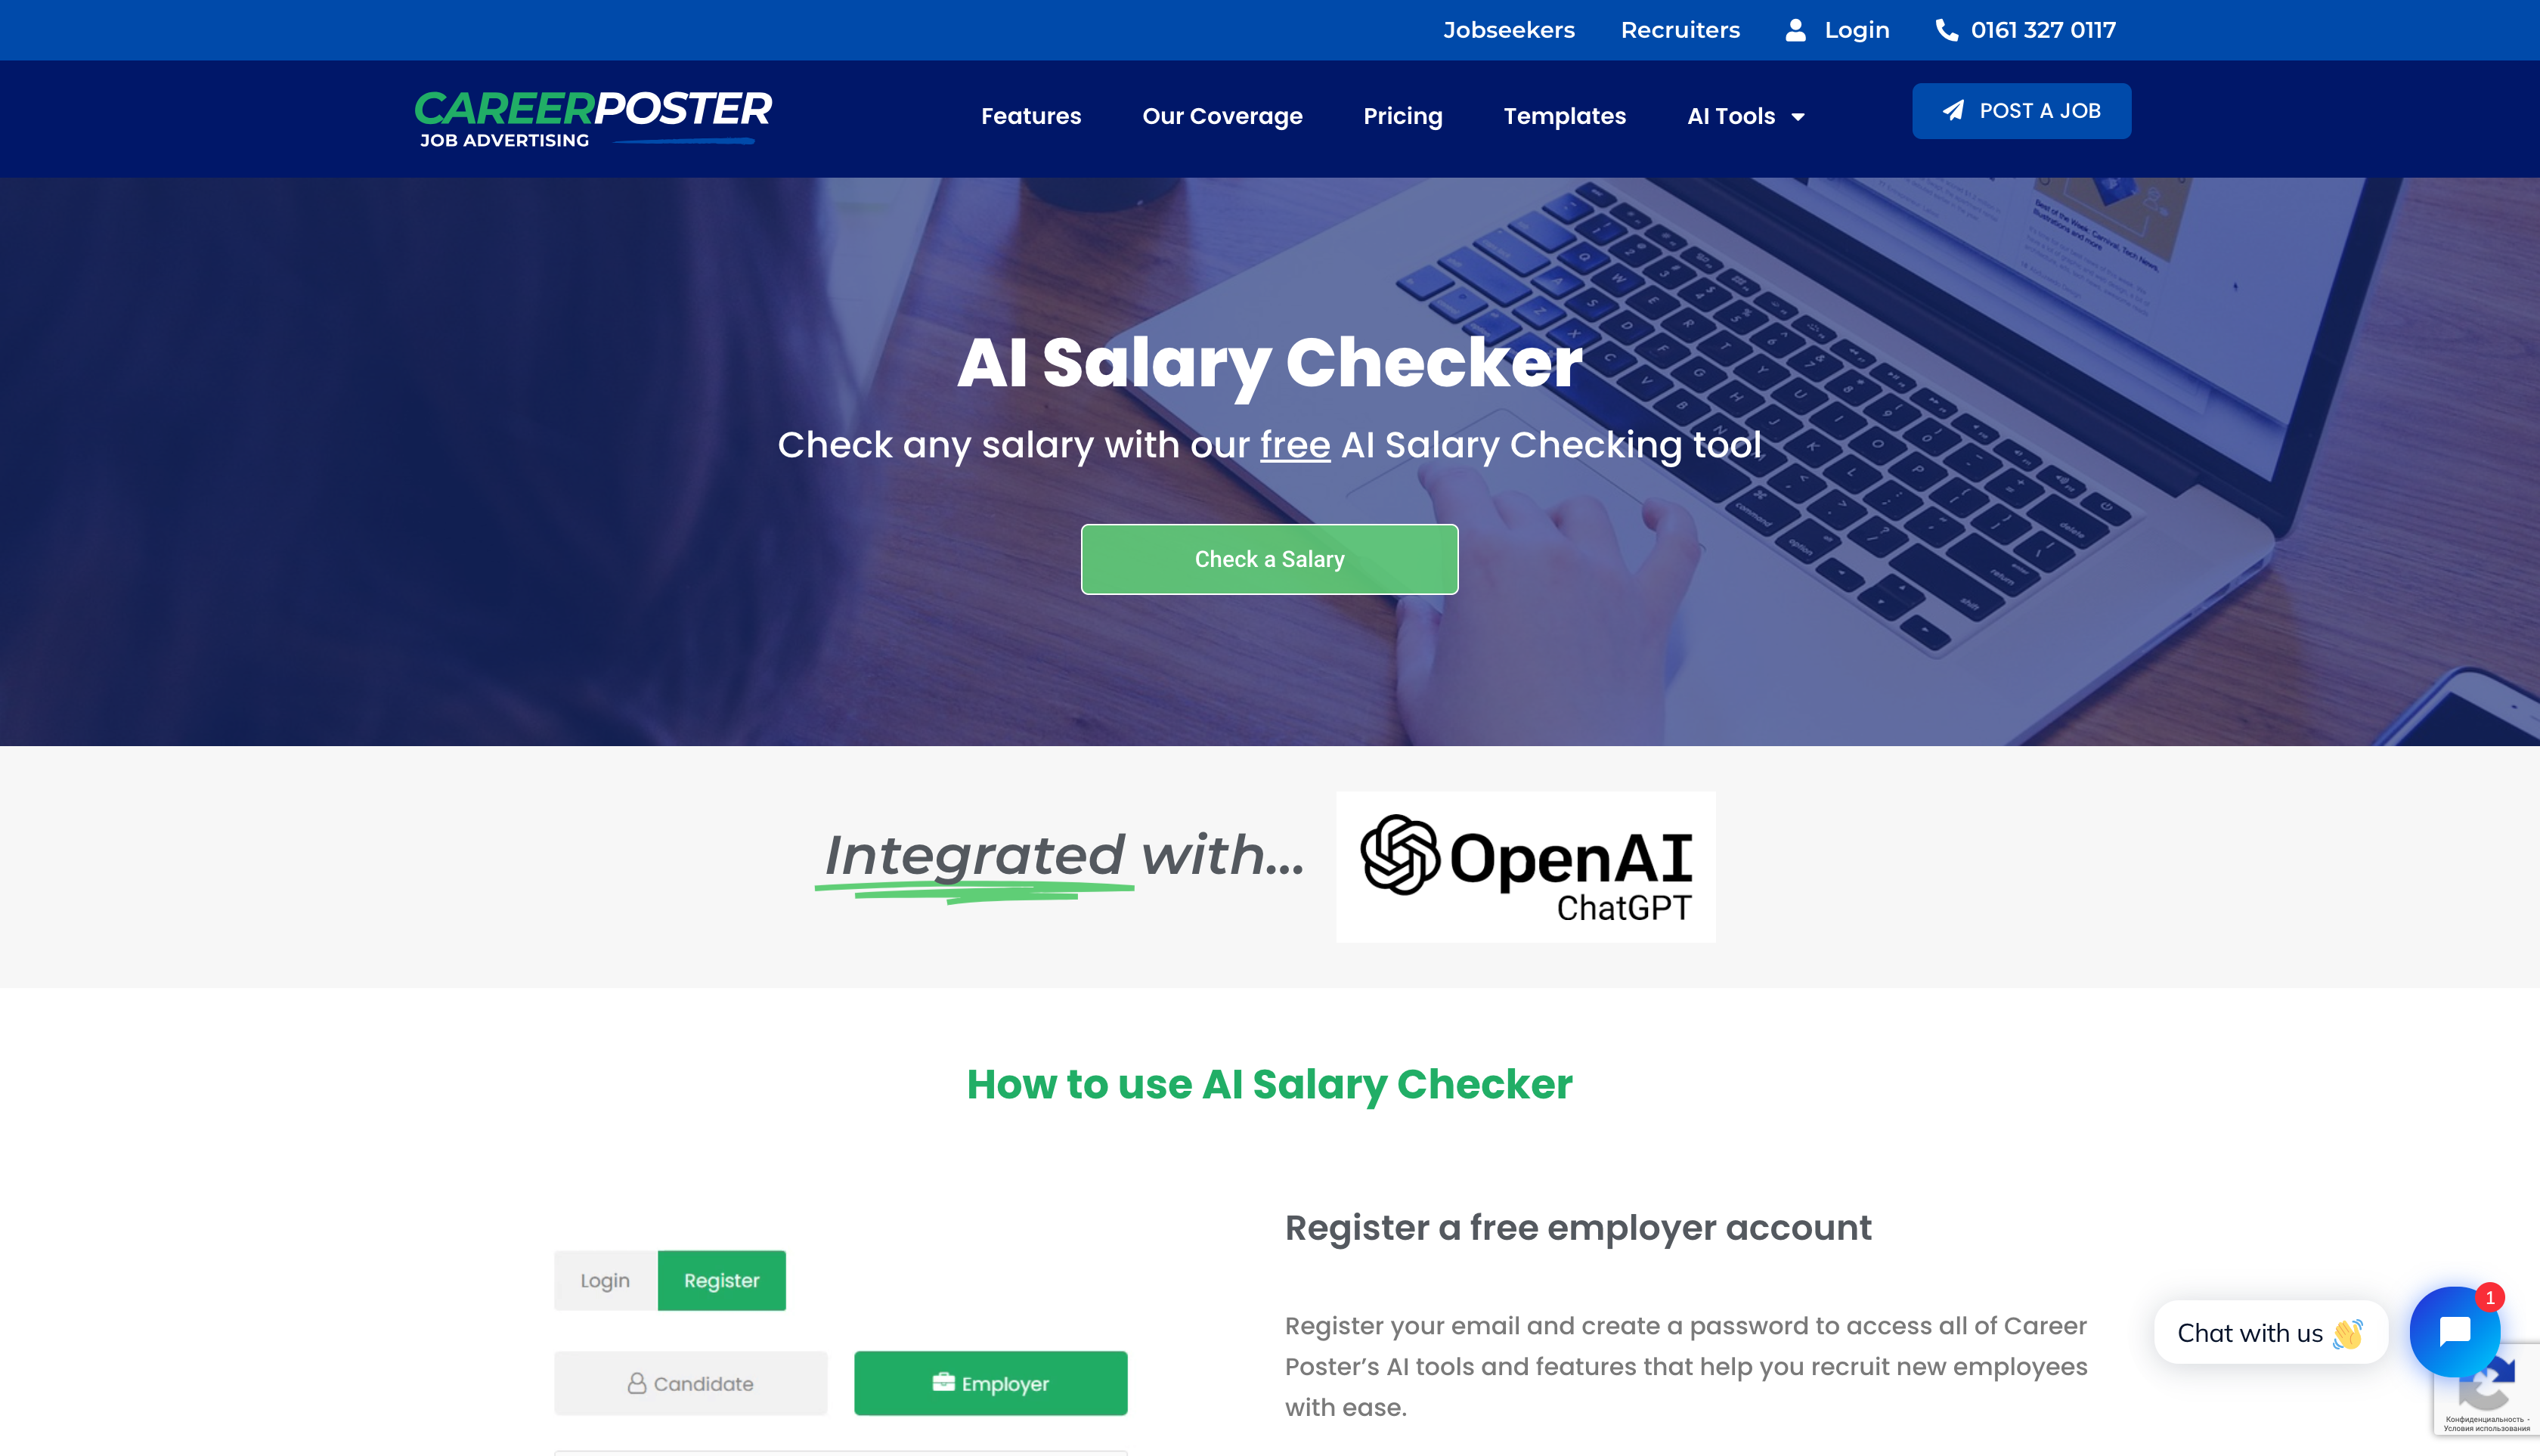 AI Salary Checker by Career Poster